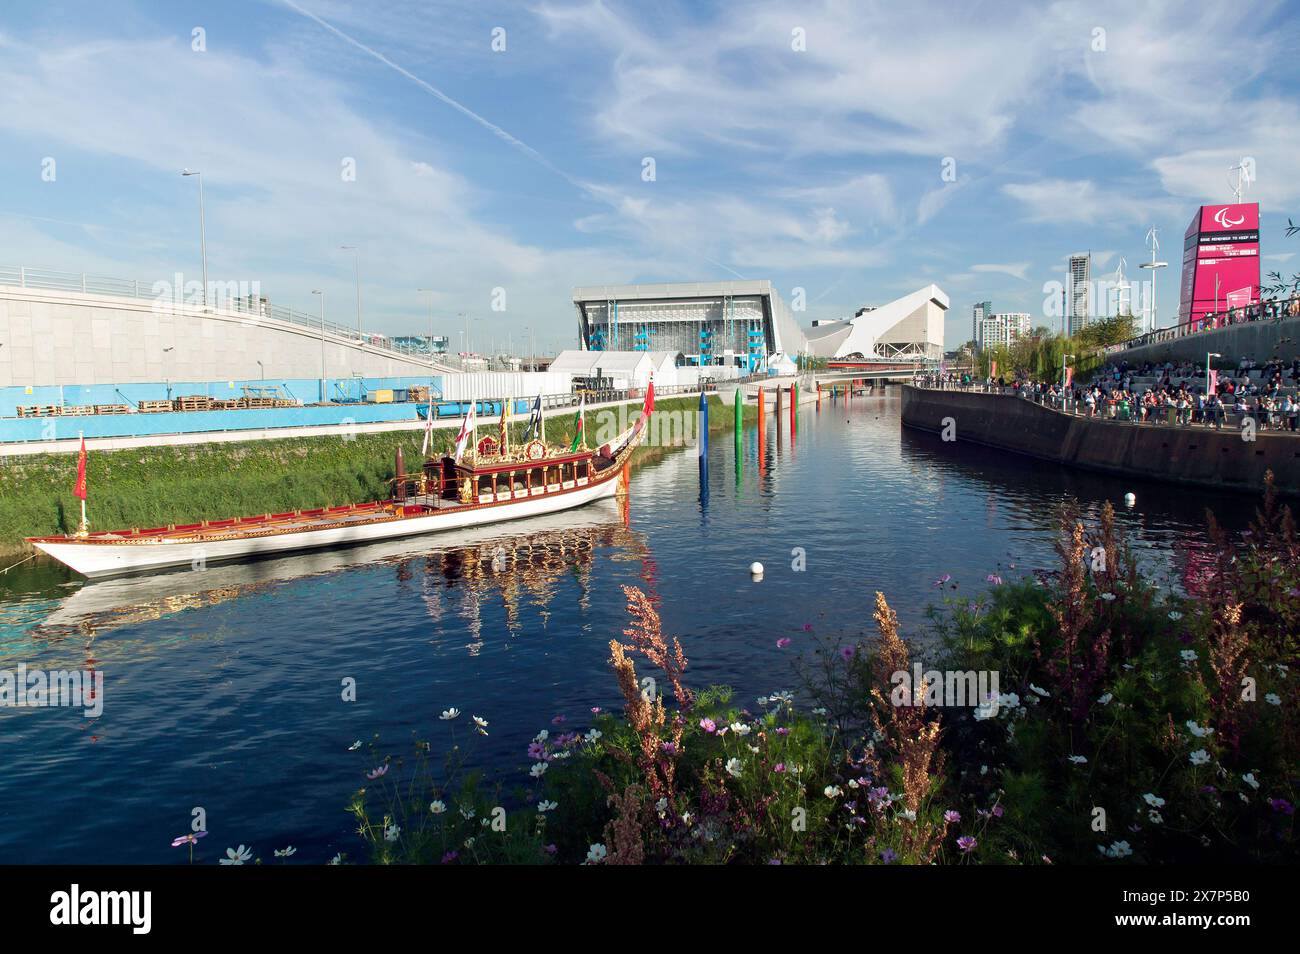 The River Lea in the Queen Elizabeth Olympic Park, during the 2012 Paralympics, showing the Royal Barge,  Water Polo  Arena and the Aquatics Centre Stock Photo